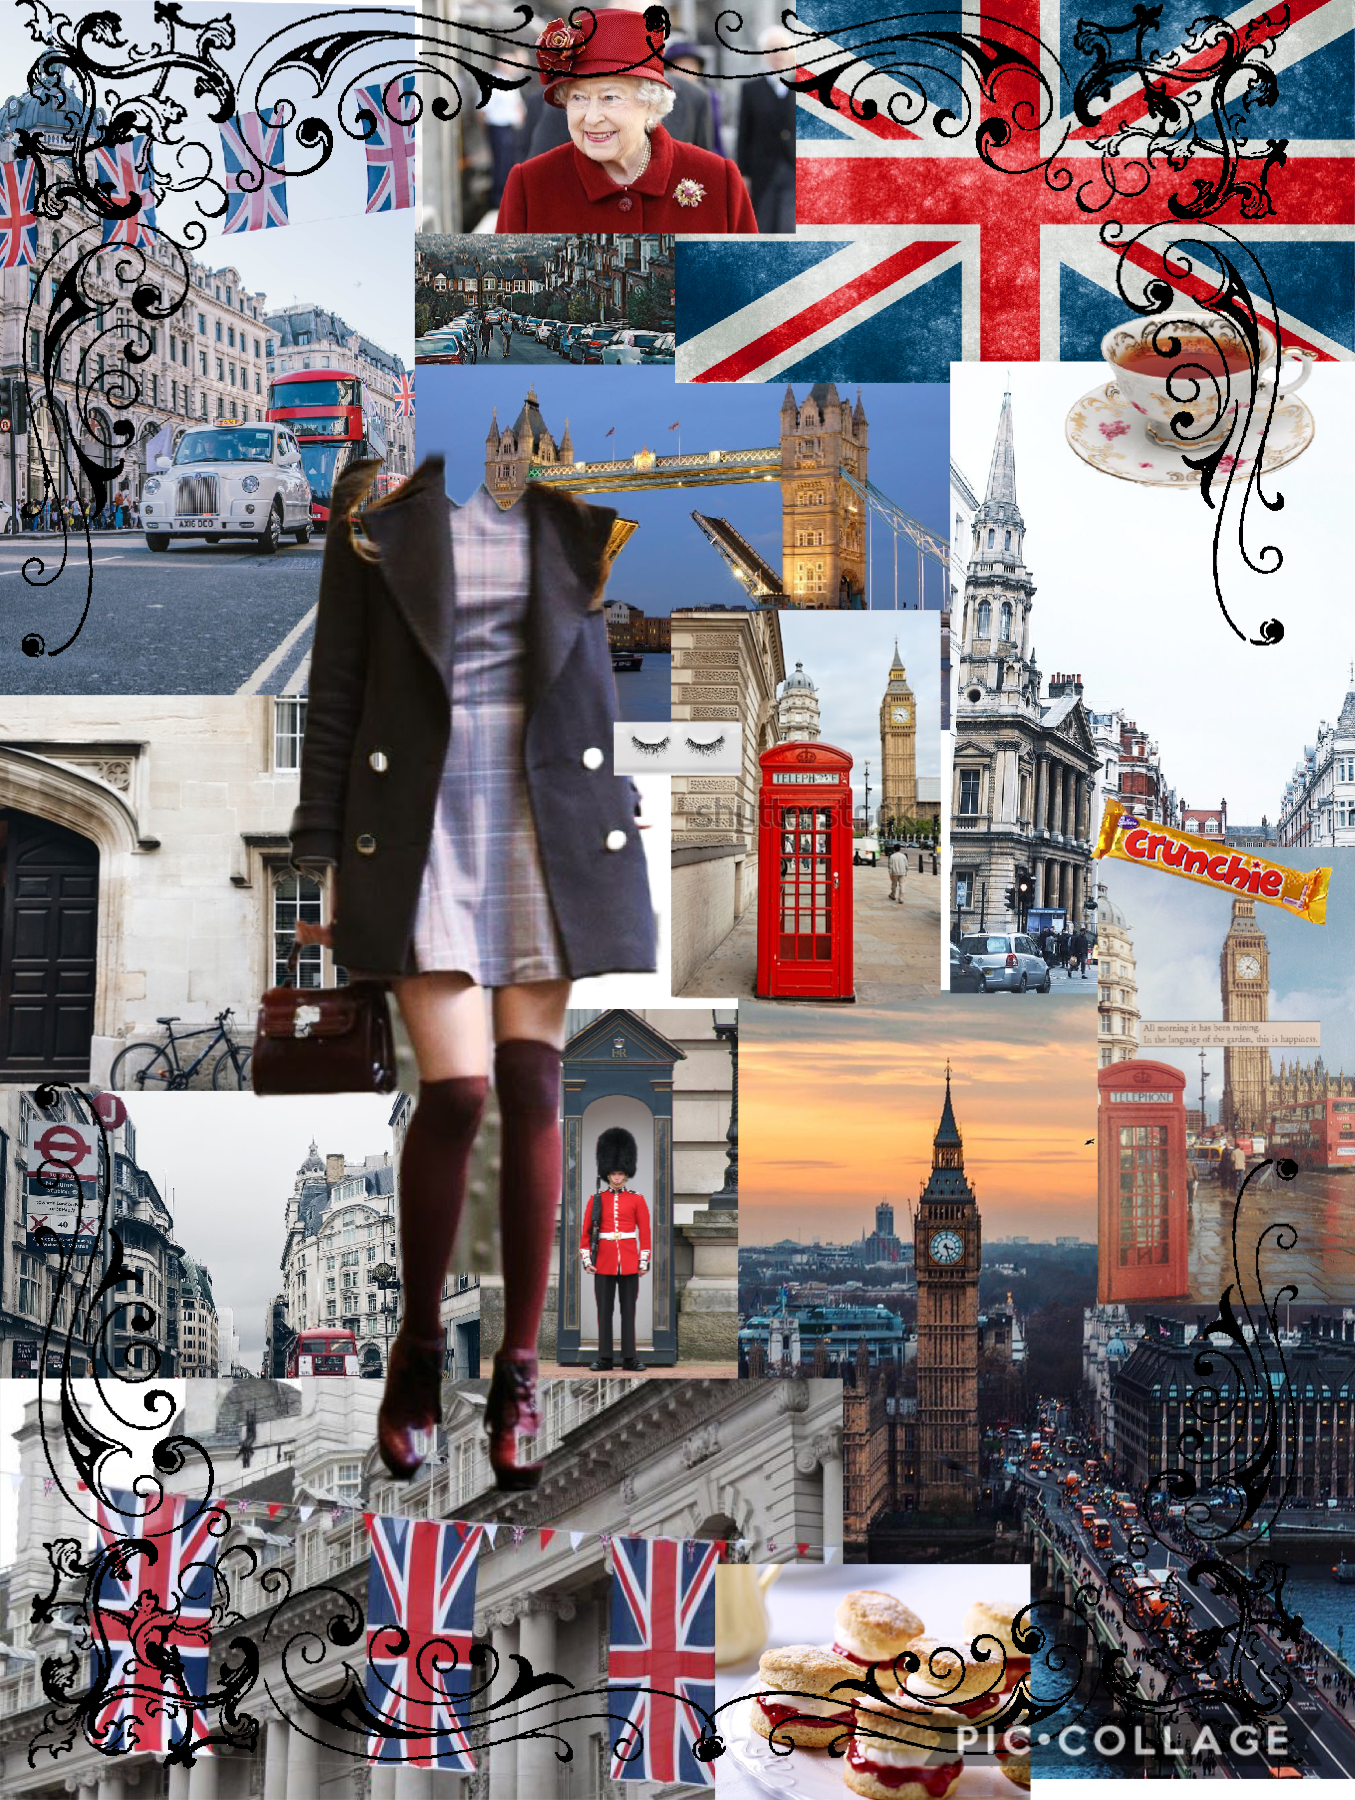 England themed 🇬🇧

 #Style #England #greatbritain #castles #Collage #PicCollage
#like #followforfollow #chic #city #wander #travel #fancy